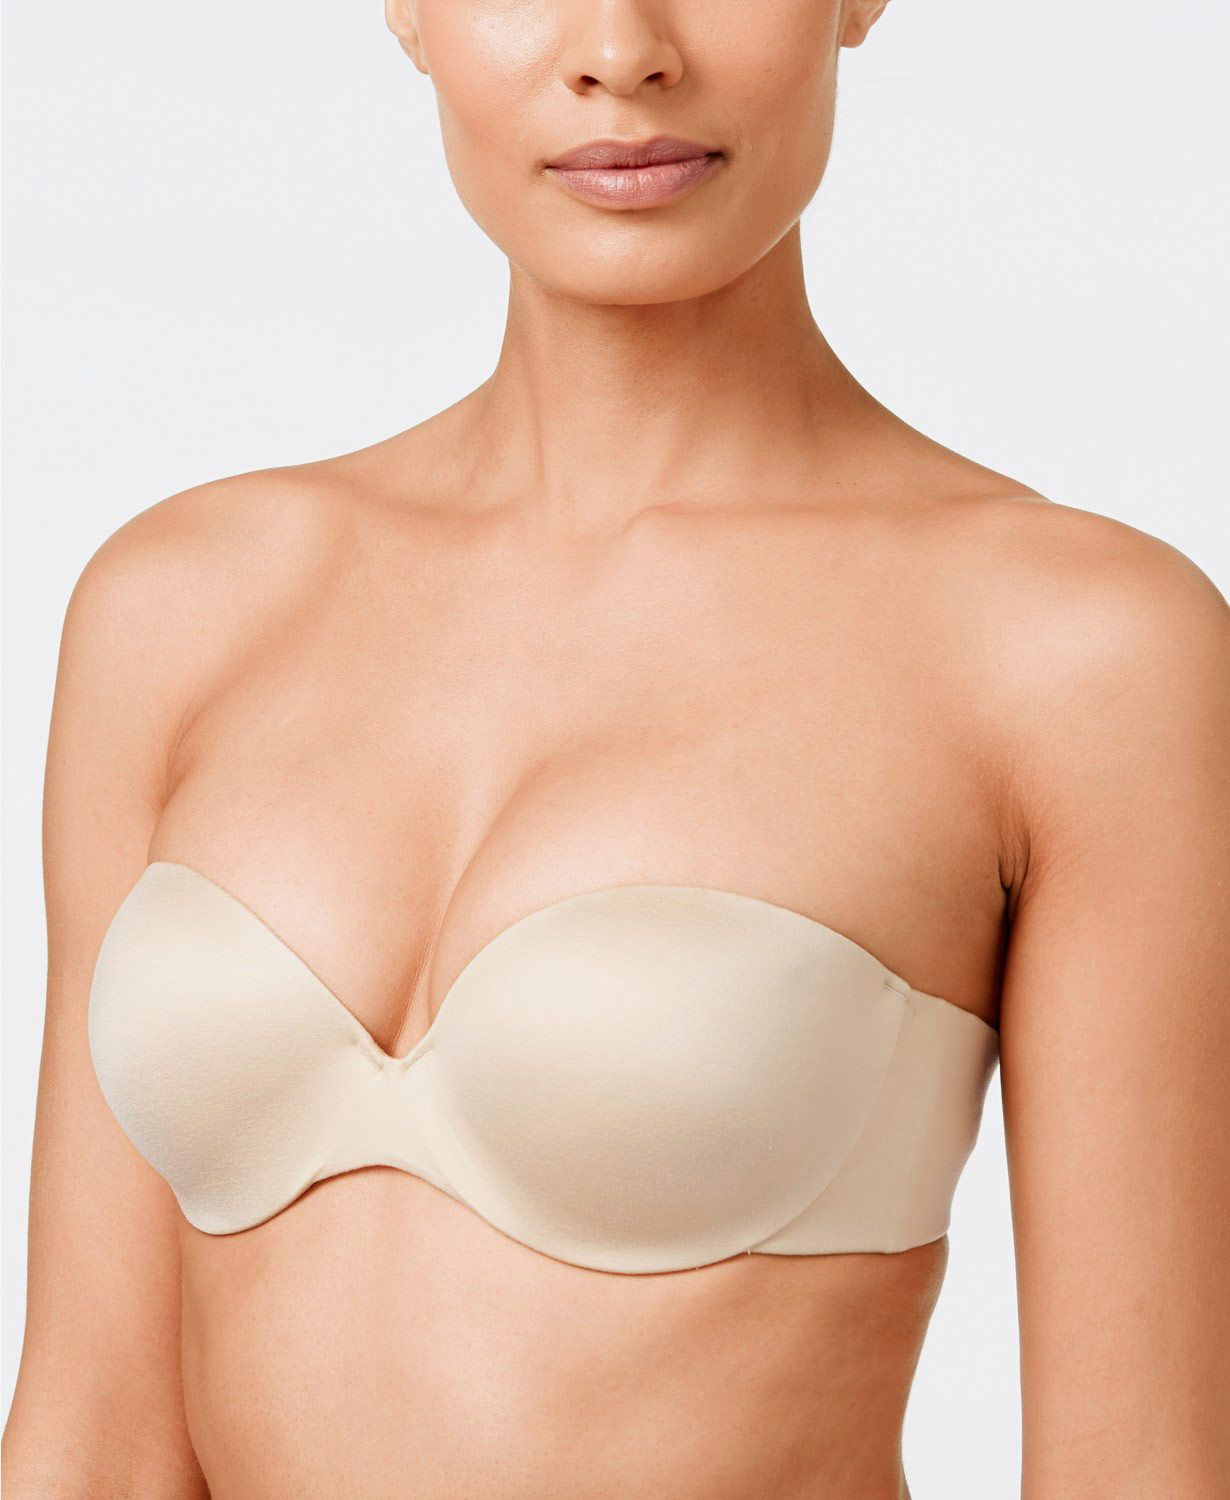 Best Strapless Bras That Are Affordable and Comfortable